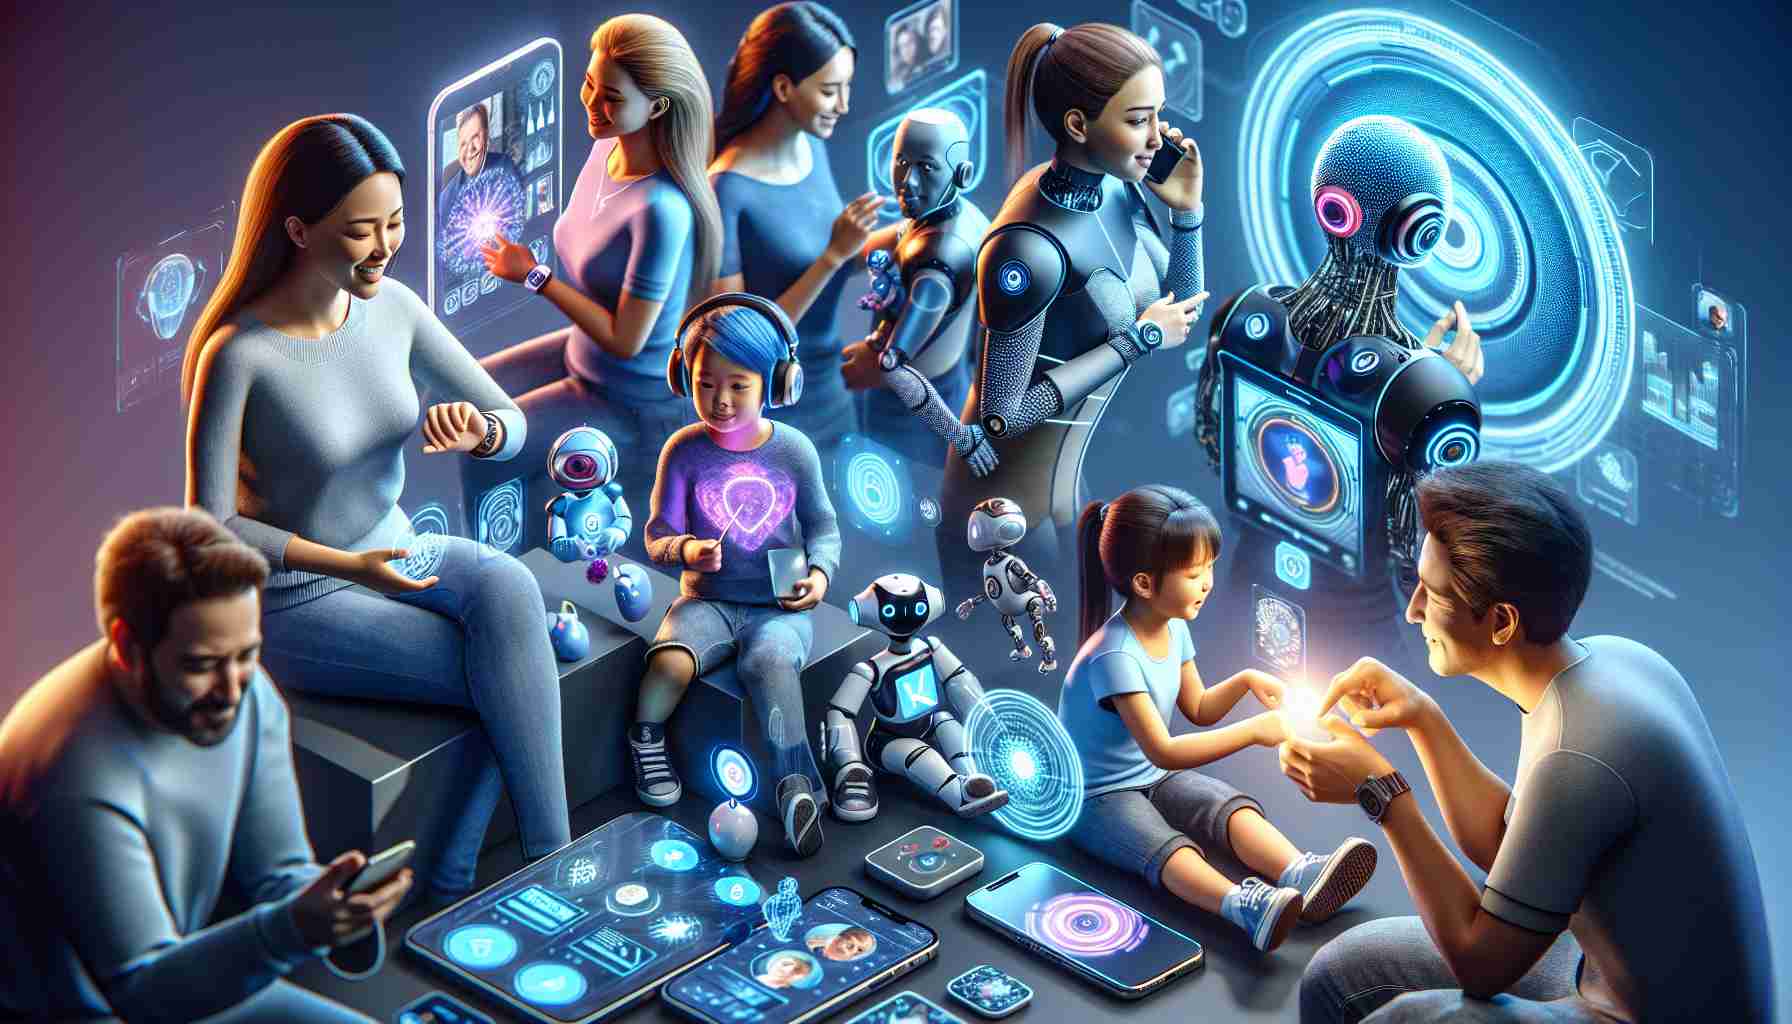 A highly detailed, realistic scene showing the concept of the rise of virtual companions. A diverse group of people, each interacting with their artificial intelligence devices - a South Asian female interacting with her advanced smart-watch, a Caucasian male talking to his home AI assistant, a Middle Eastern child playing with an AI-powered robot pet, and an African woman on a video call with her AI-financial advisor. The technology is portrayed with sleek, futuristic designs, glowing LED interfaces, and holographic displays, embodying the cutting-edge advancements.